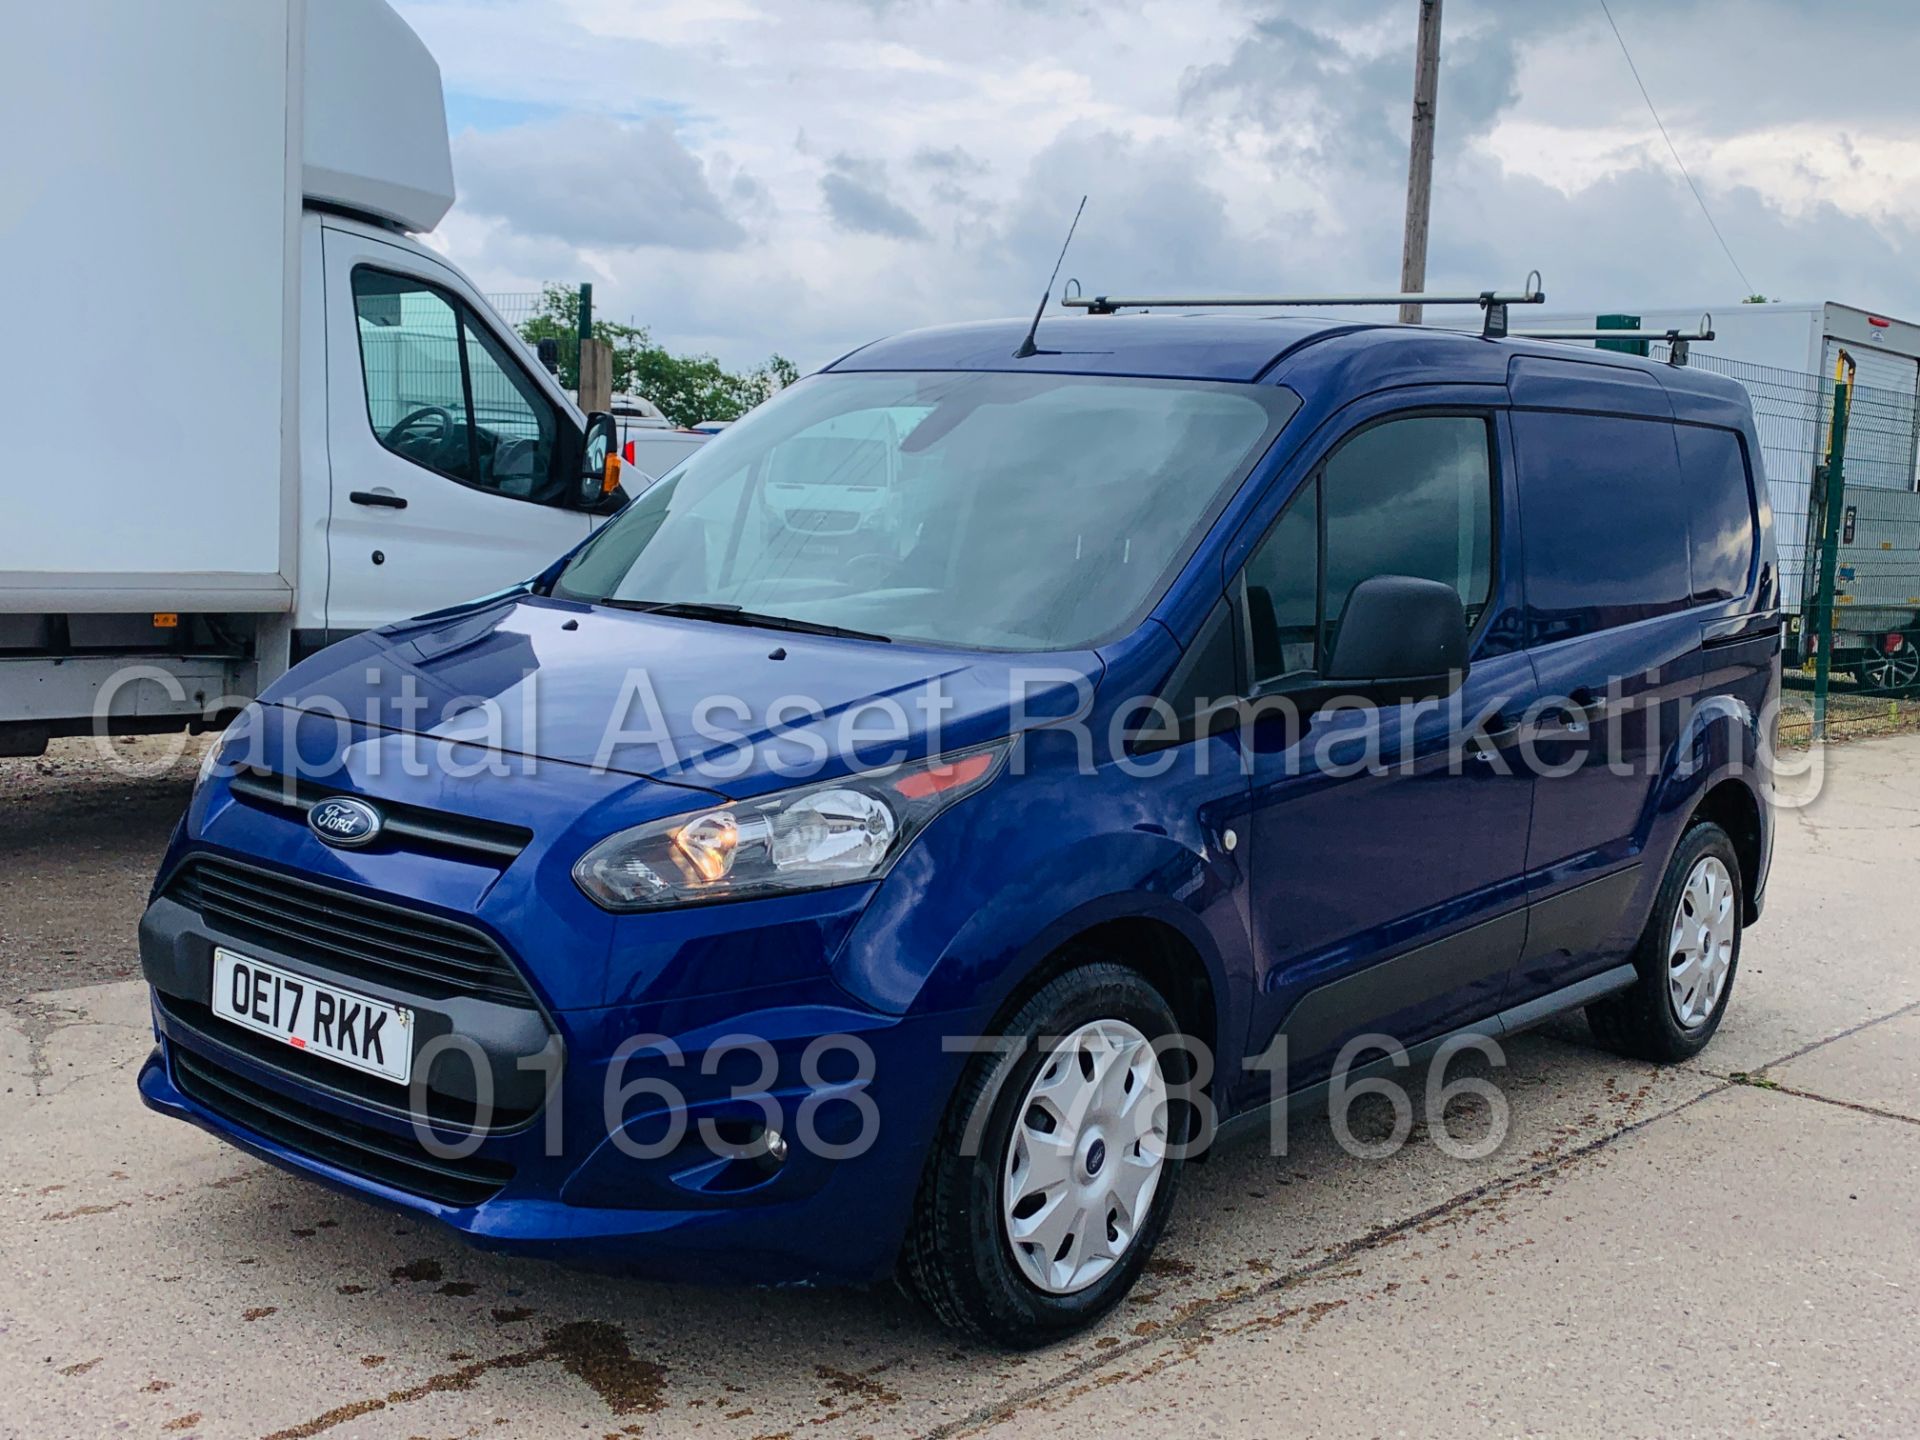 (On Sale) FORD TRANSIT CONNECT *TREND* SWB (2017 - EURO 6 VERSION) '1.5 TDCI - 100 BHP' (1 OWNER) - Image 2 of 39